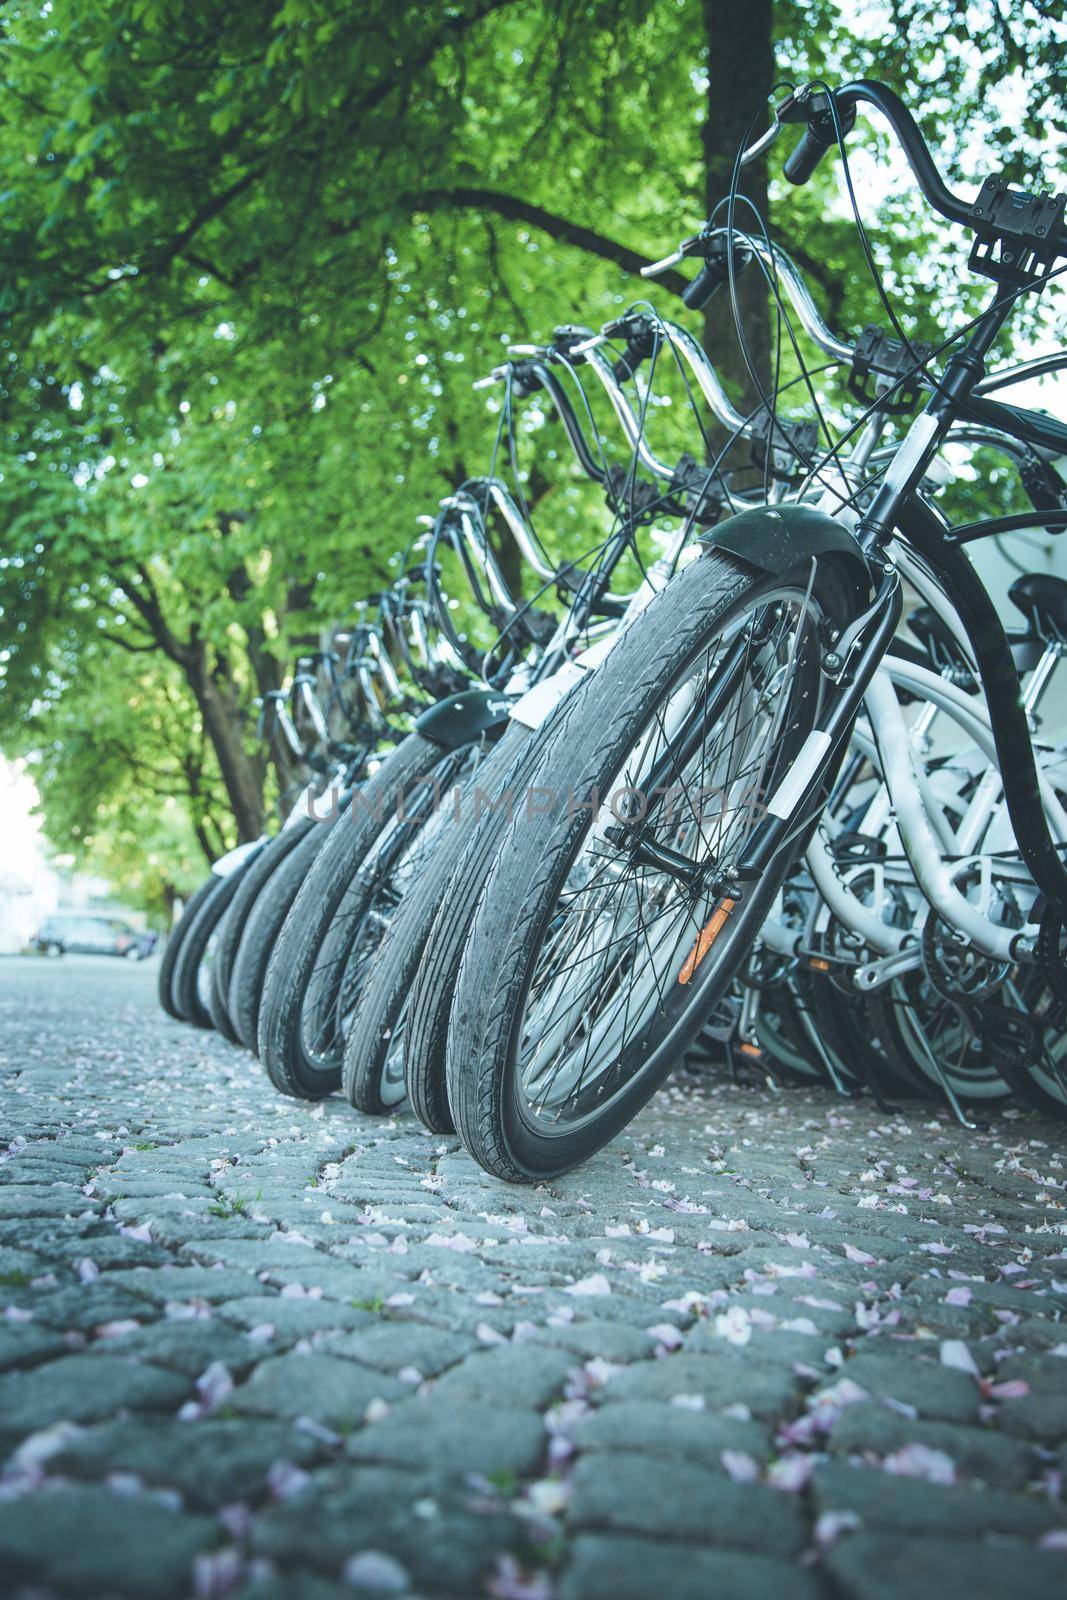 Parking bikes for rental in the city, tourism